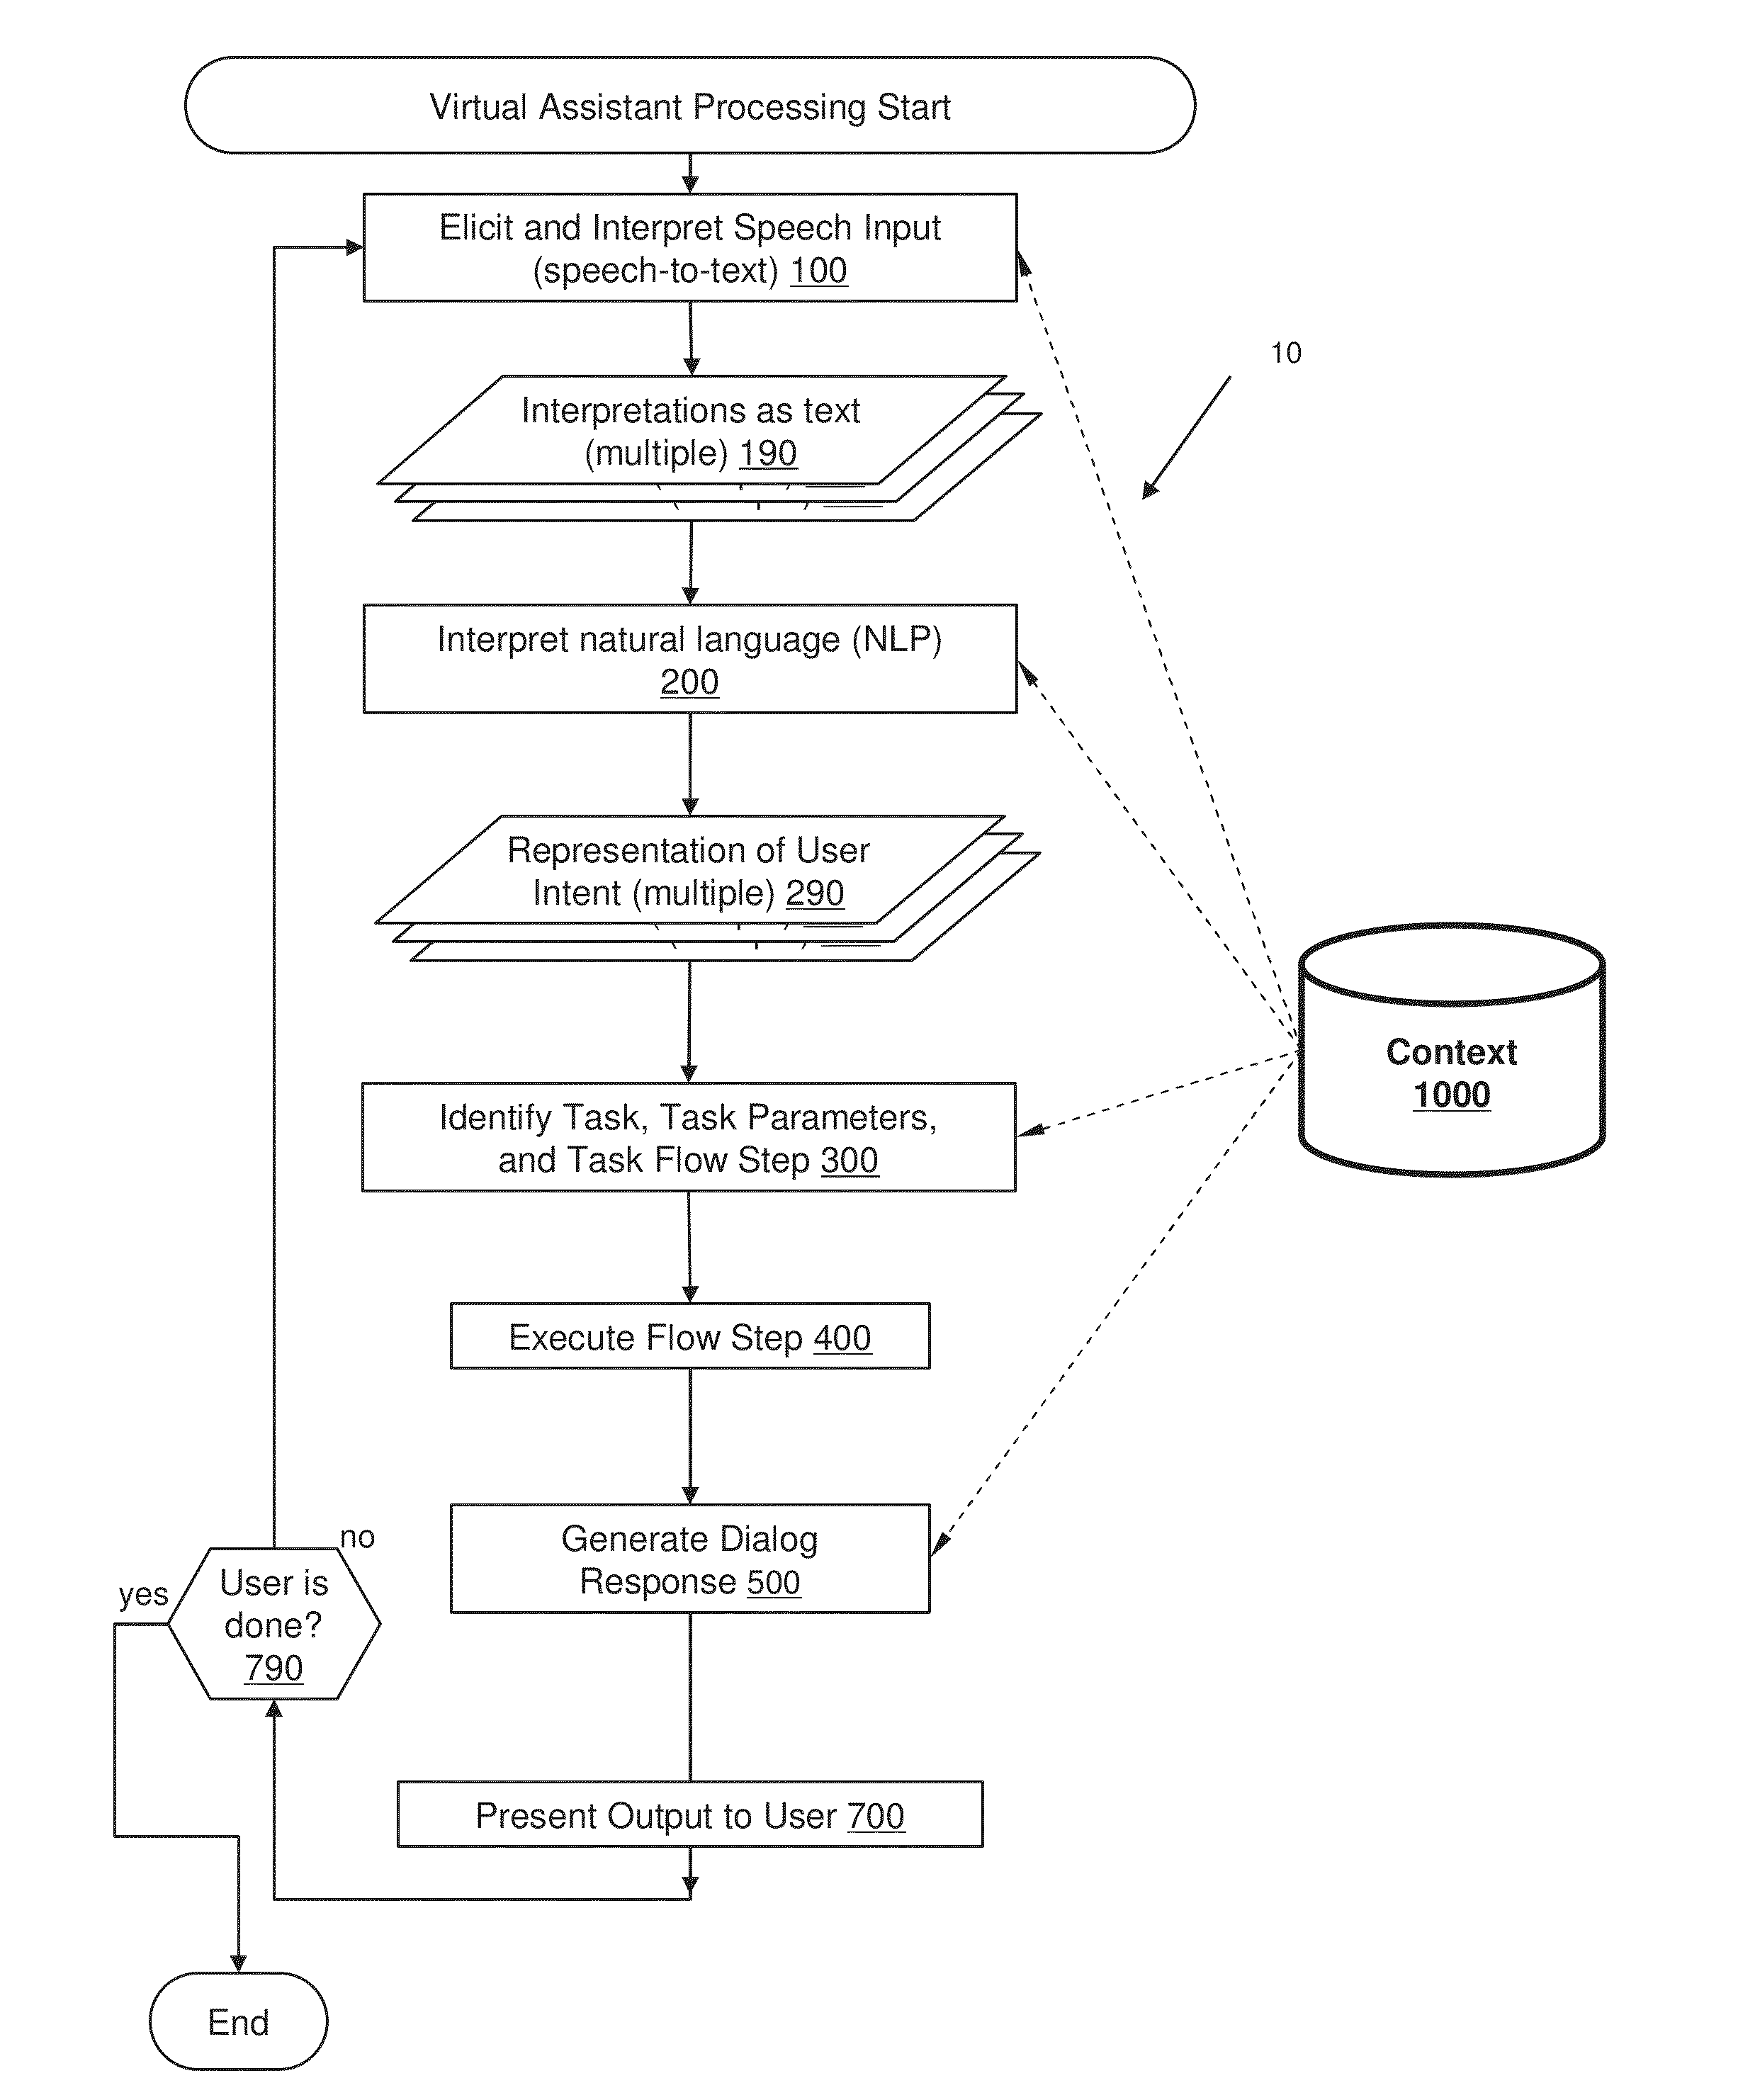 Using context information to facilitate processing of commands in a virtual assistant